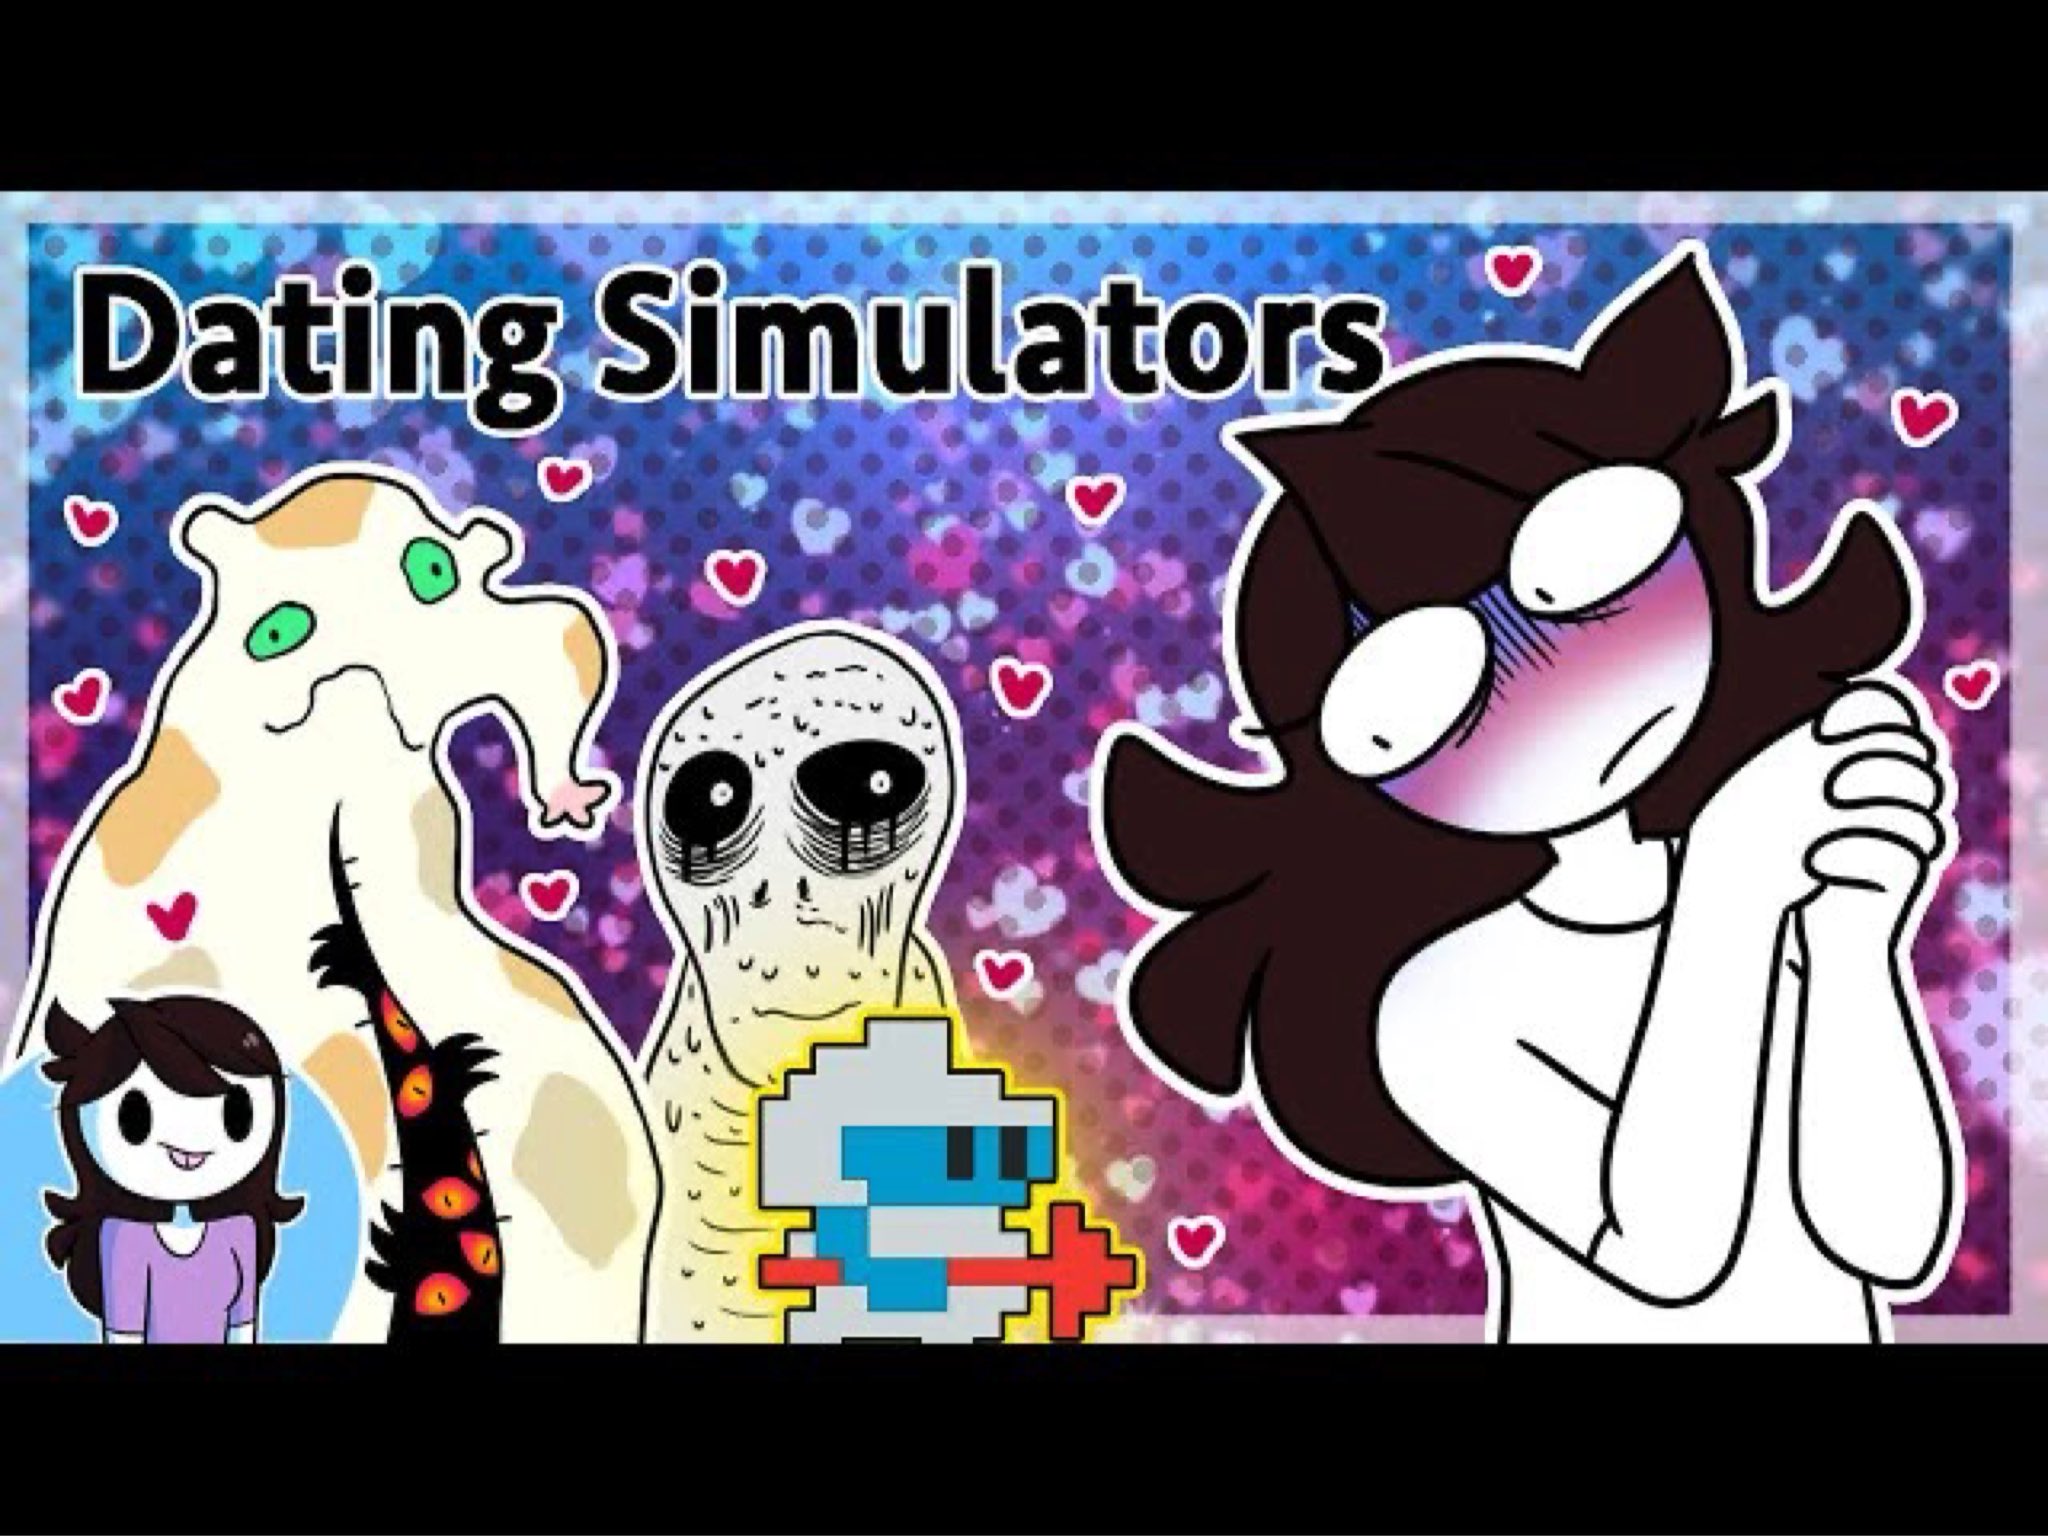 Jaiden animations was trending – Ony's chaos realm